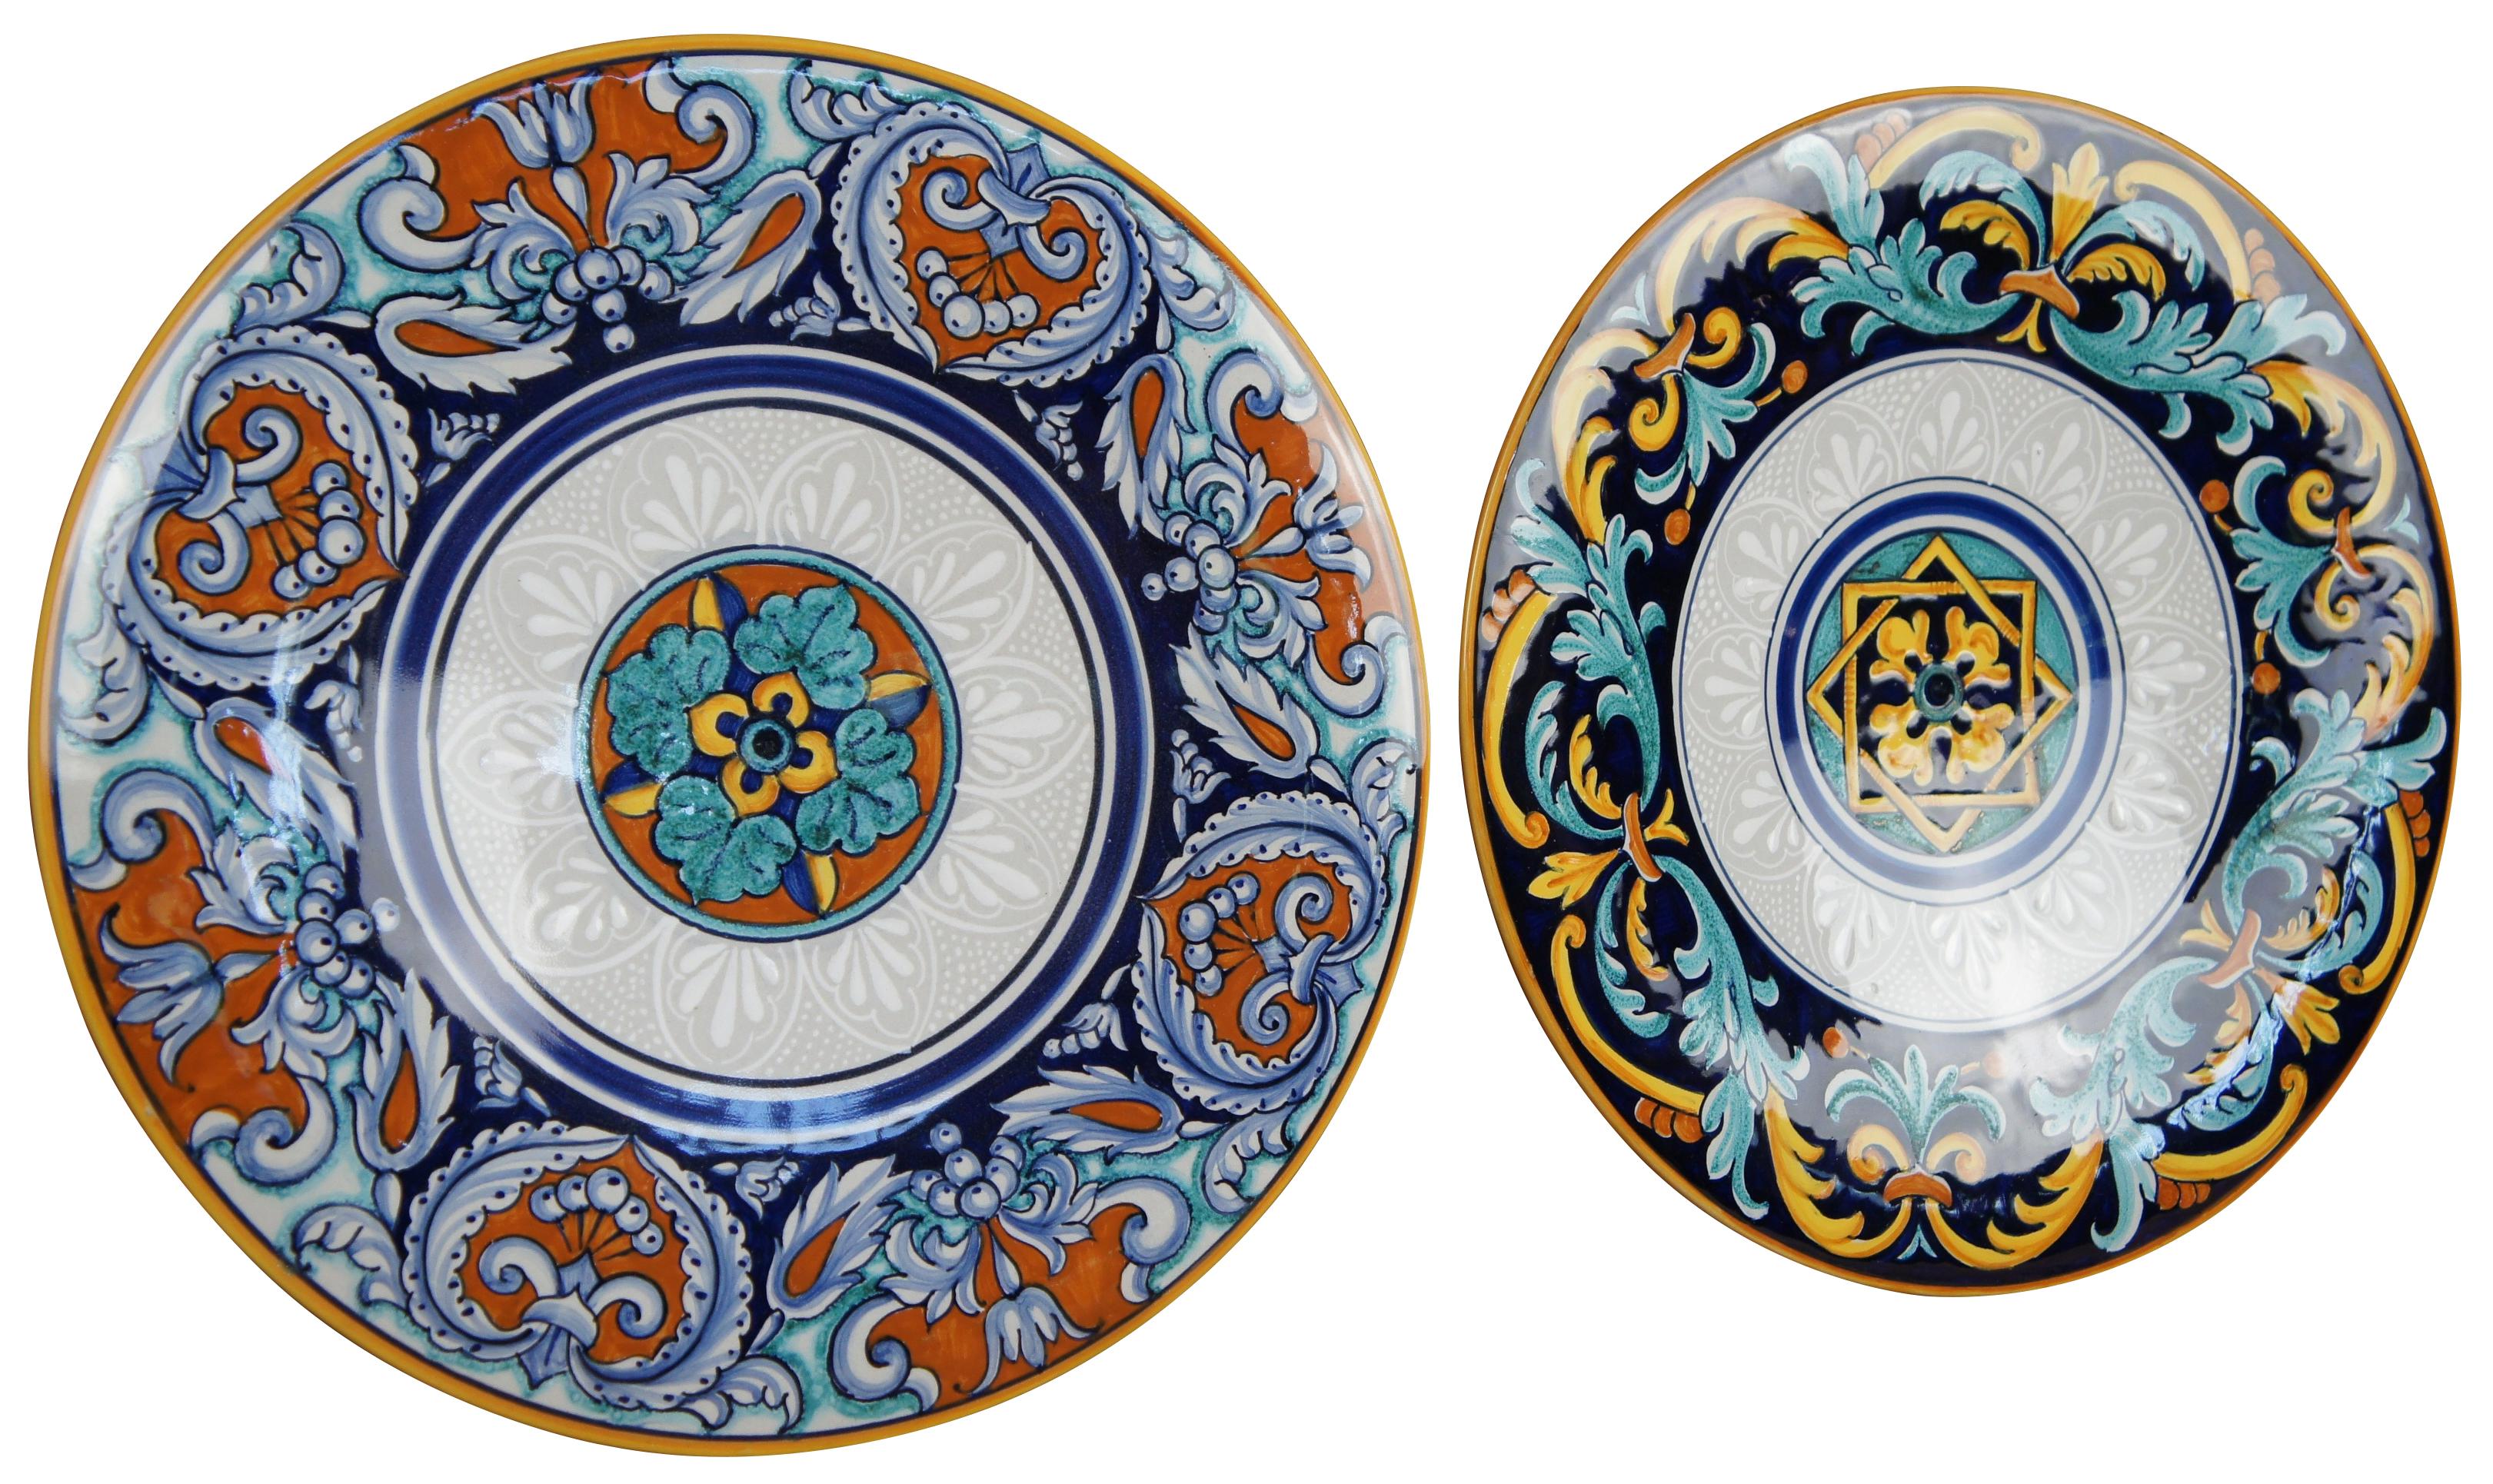 Two ceramic Francesca plates made in Deruta Italy for Cottura pottery with colorful geometric patterns both with wire for hanging.
Measure: 12